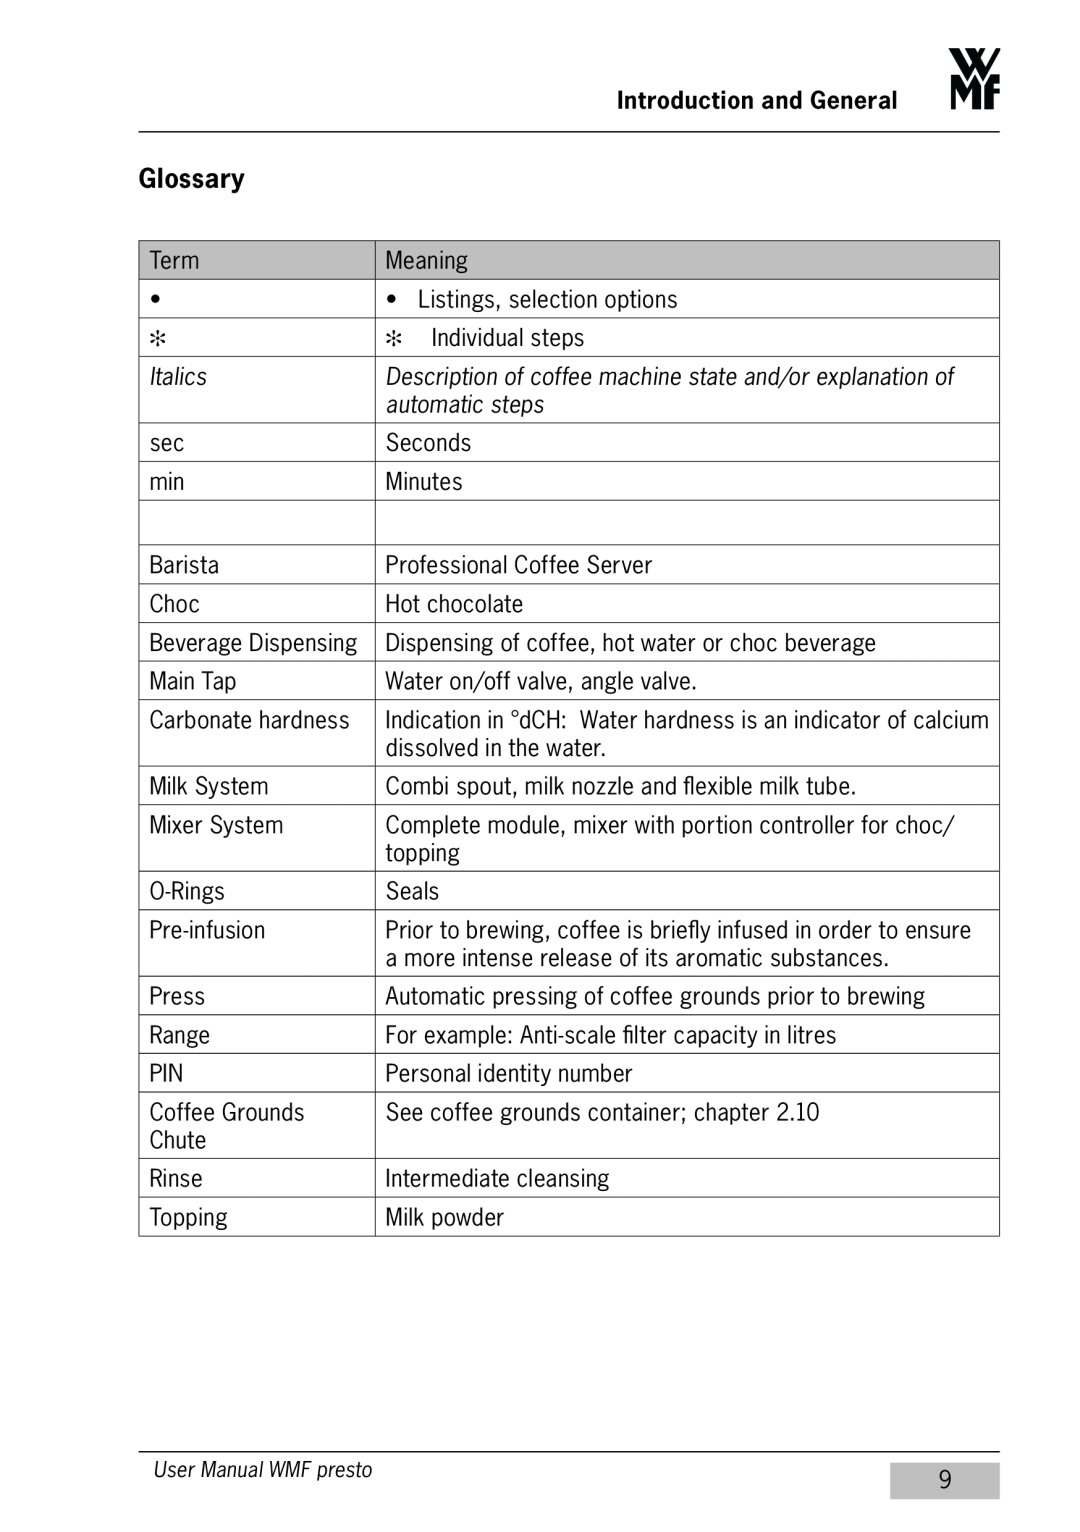 WMF Americas 1400 Glossary, Italics, Description of coffee machine state and/or explanation of, automatic steps, Seconds 